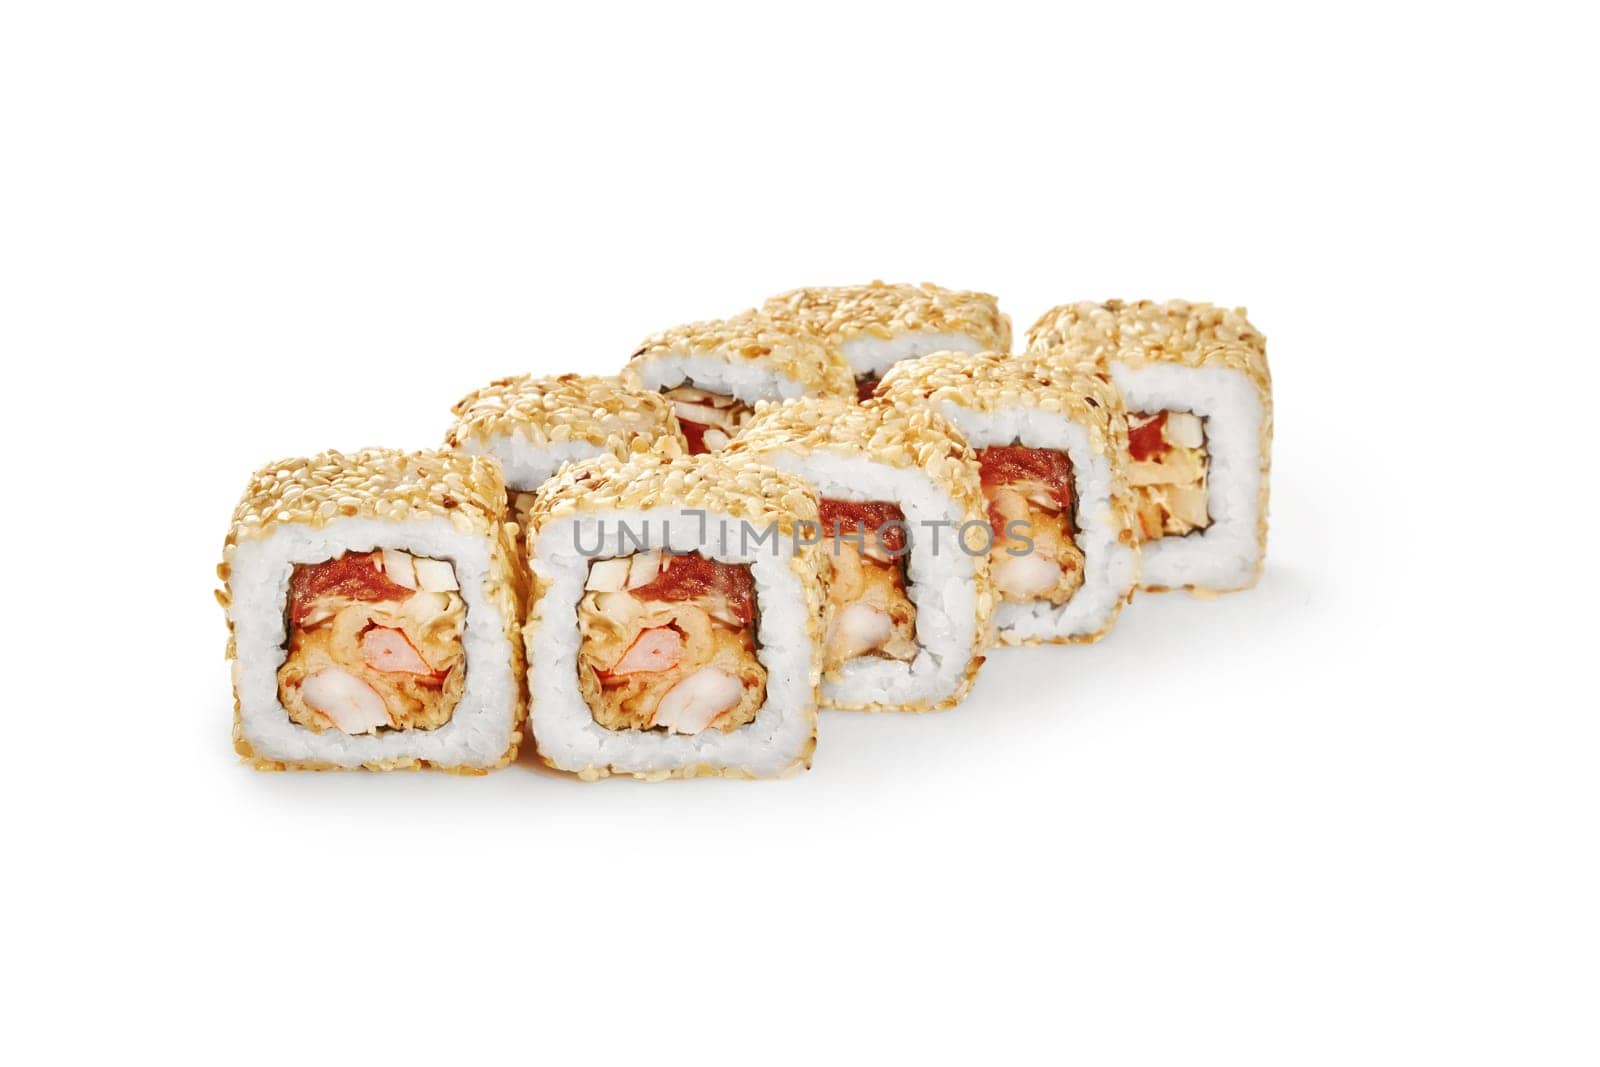 Delicious rolls coated with toasted sesame seeds, filled with tempura shrimp, tobiko and apple, isolated on white background. Fusion version of traditional Japanese sushi